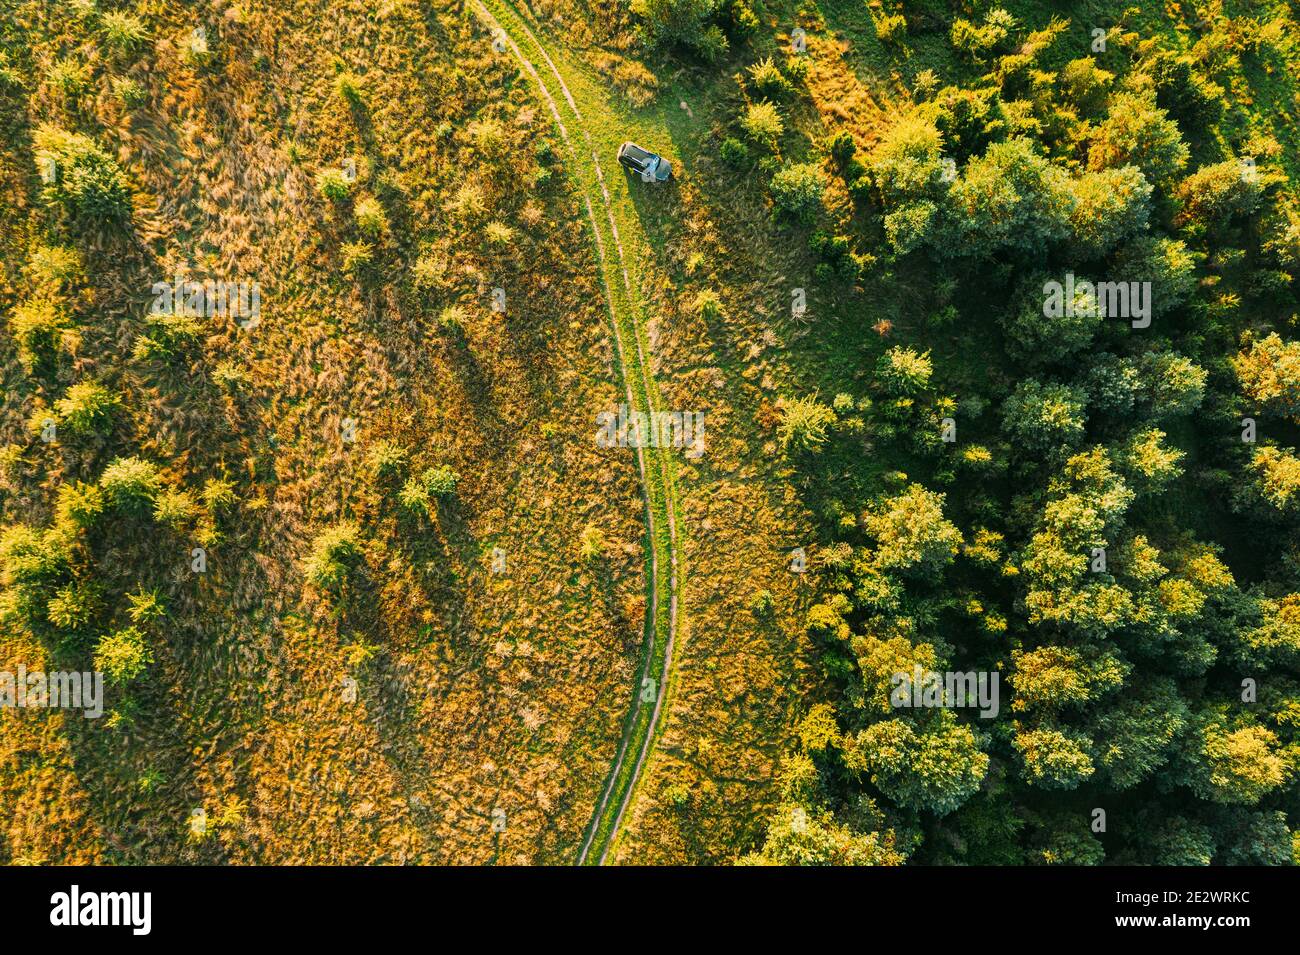 Aerial View Of Car Near Country Road Thgrough Forest And Green Meadow Landscape In Sunny Summer Morning. Top View Of Beautiful European Nature From Stock Photo